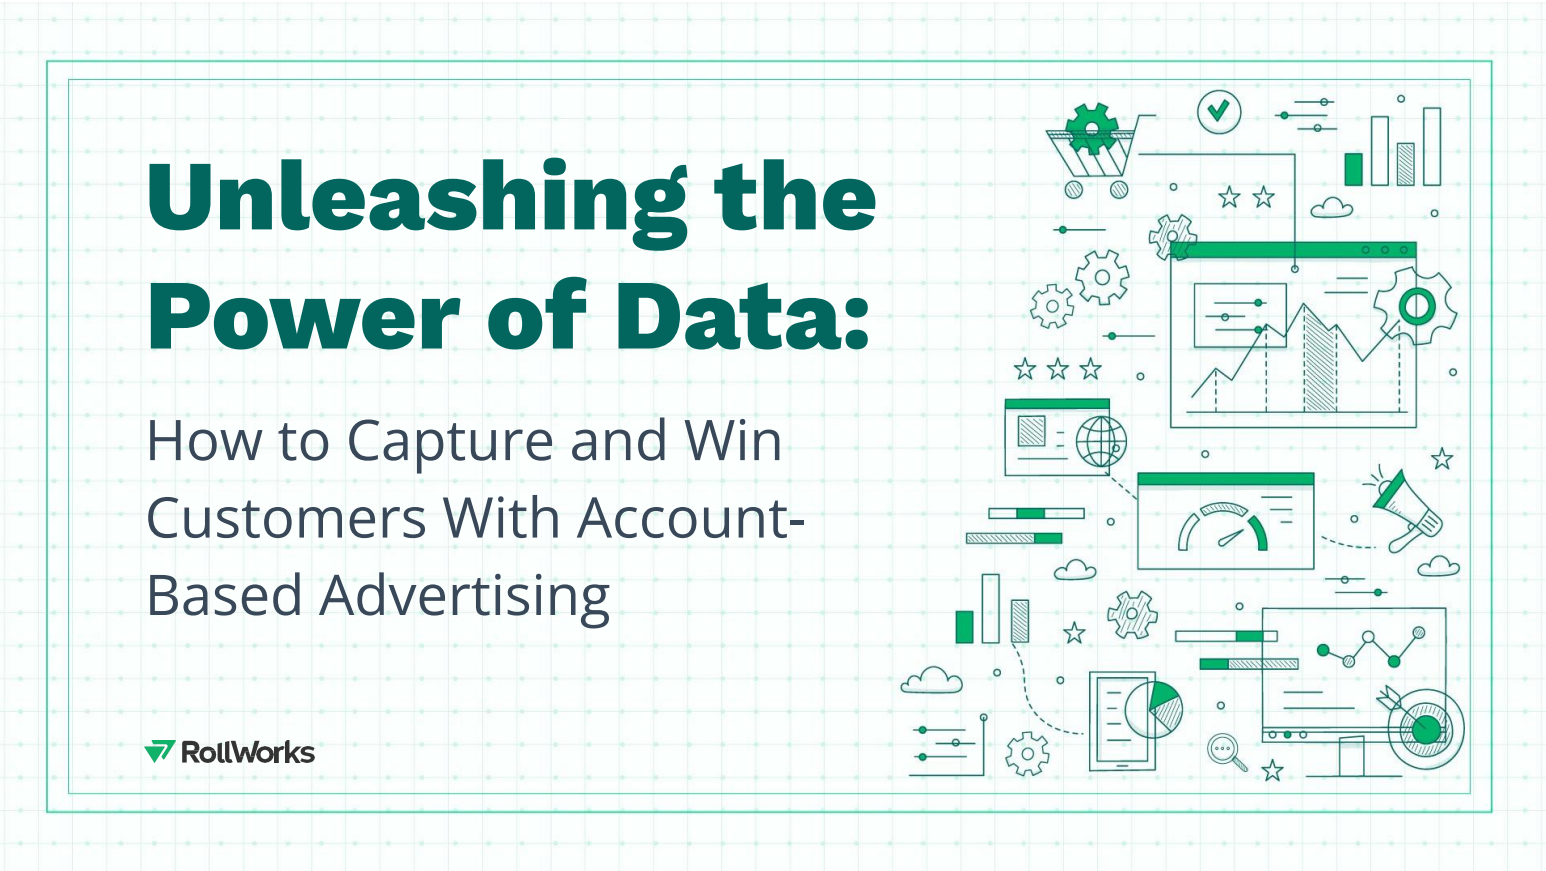 Unleashing the Power of Data: How to Capture and Win Customers With Account-Based Advertising